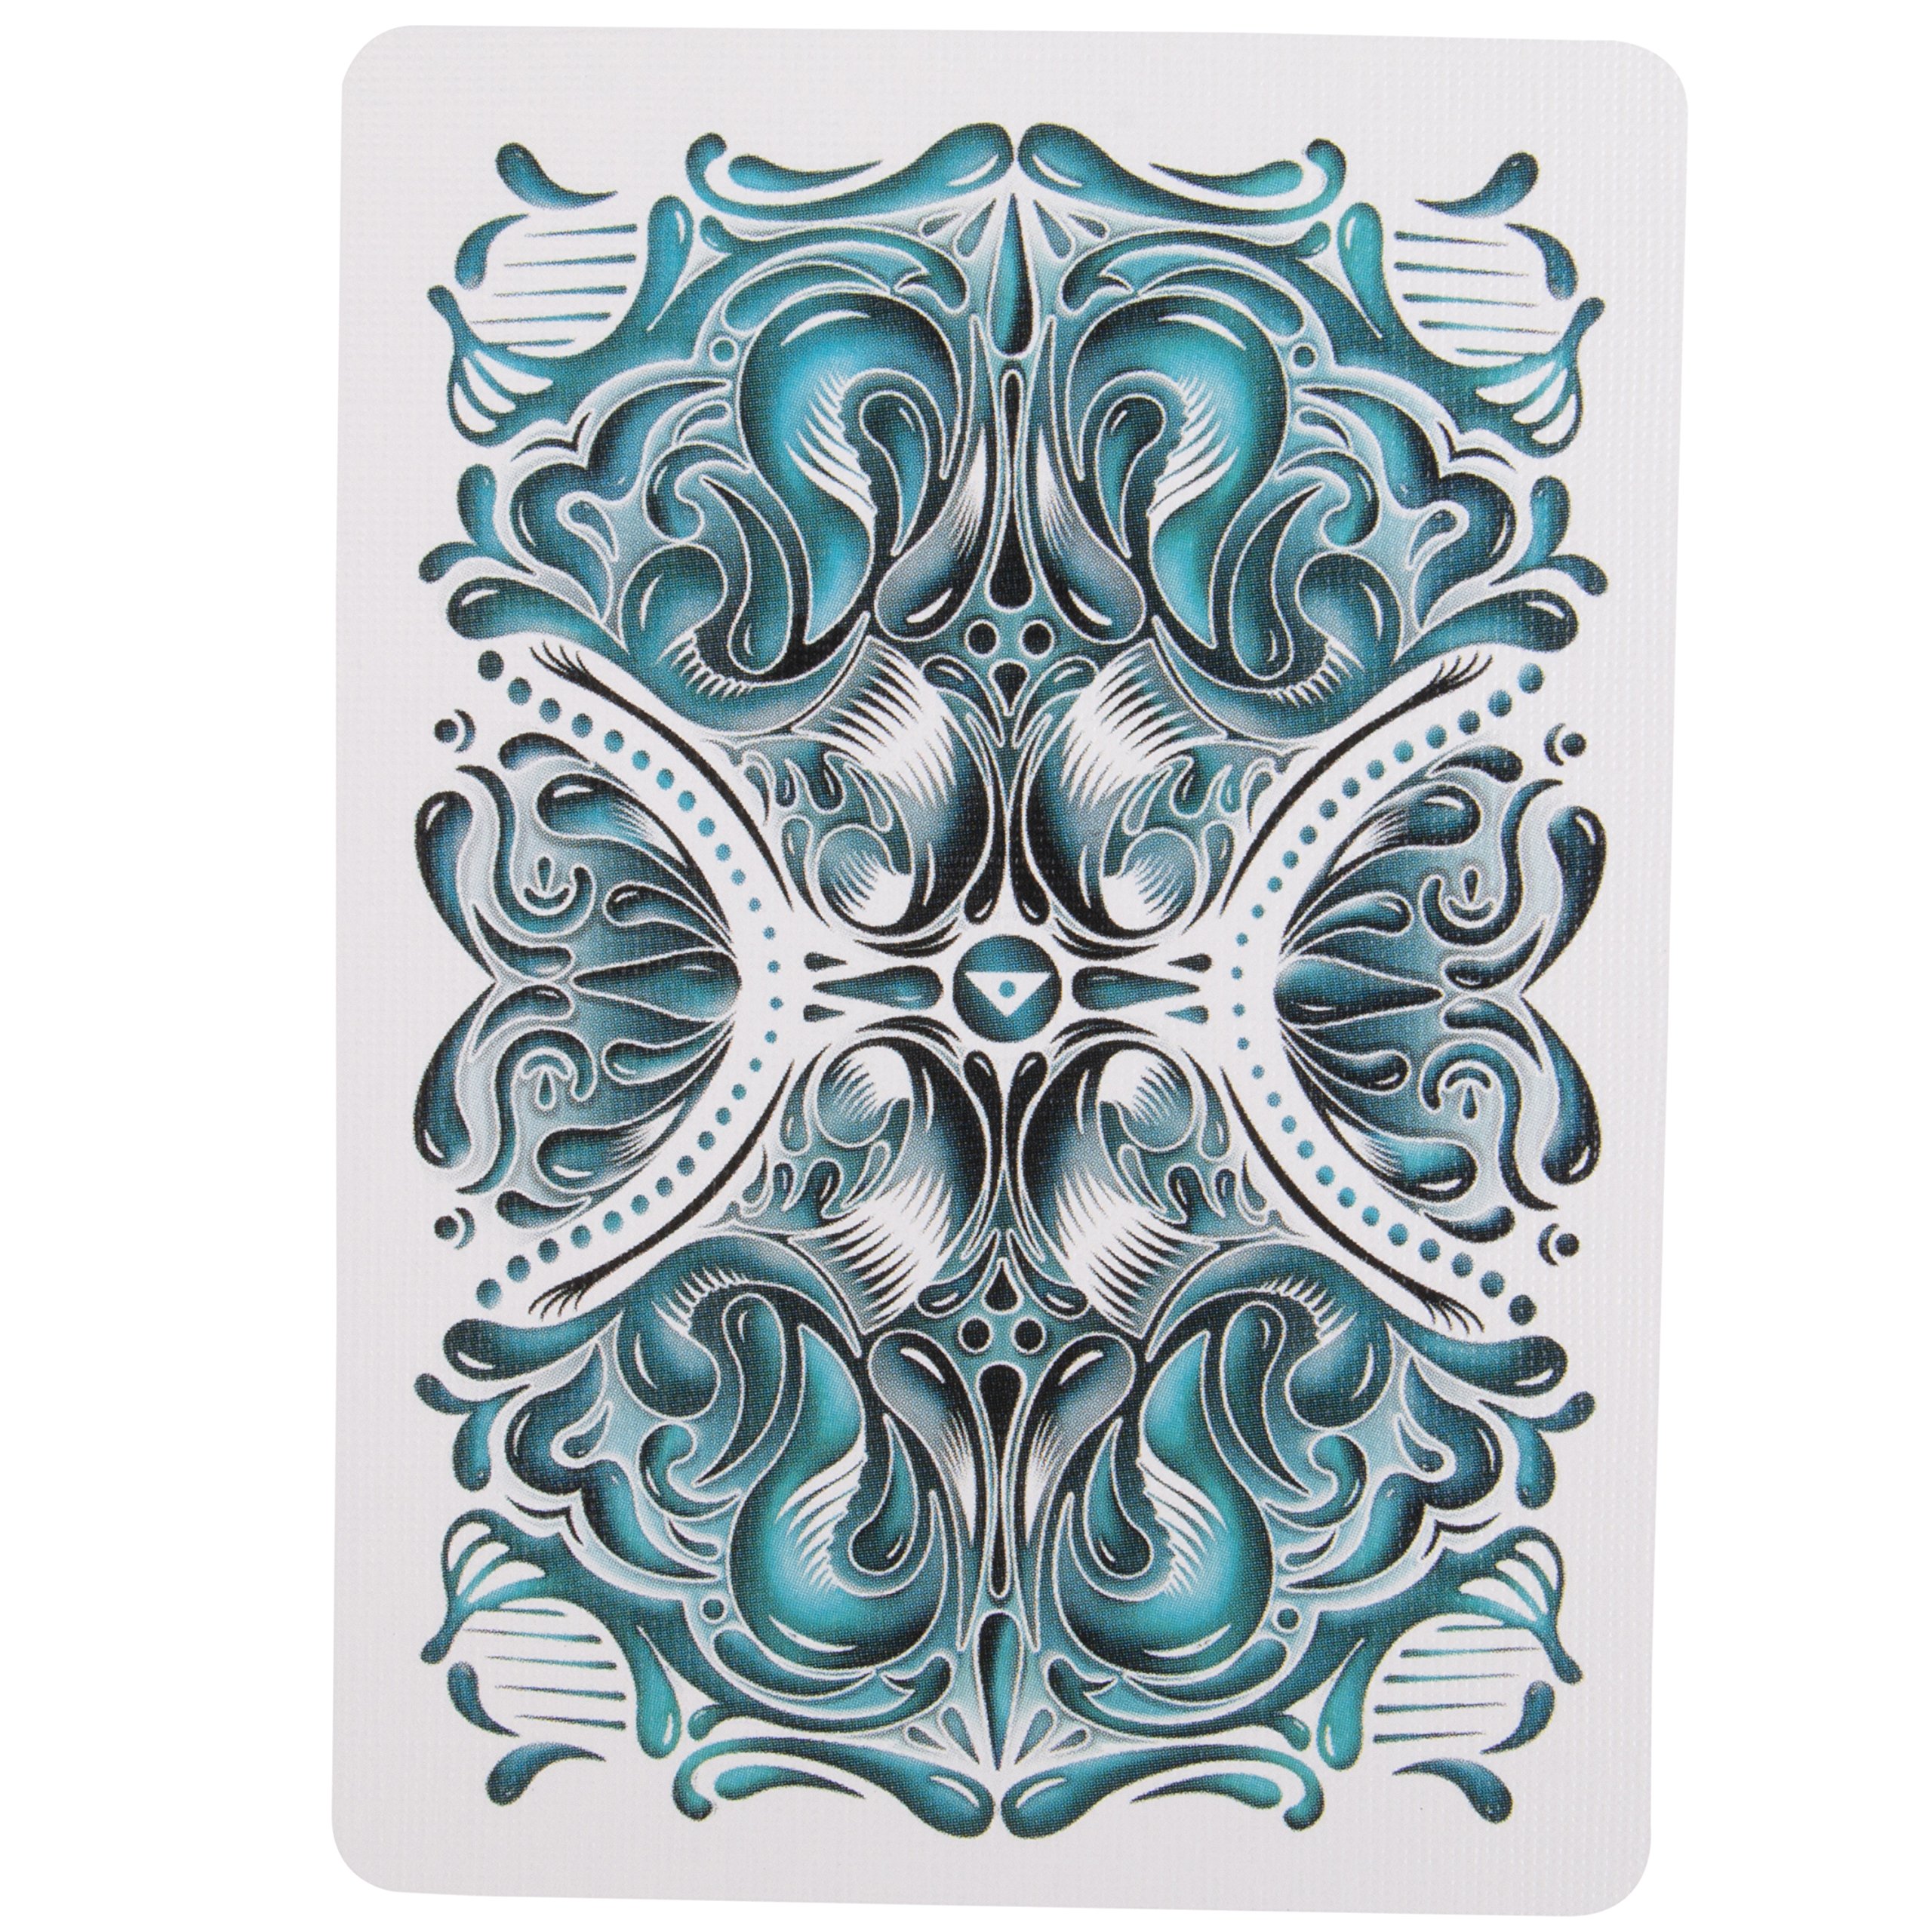 Ellusionist Fathom Playing Card Deck - Water Ocean Themed - For Games and Magic Tricks